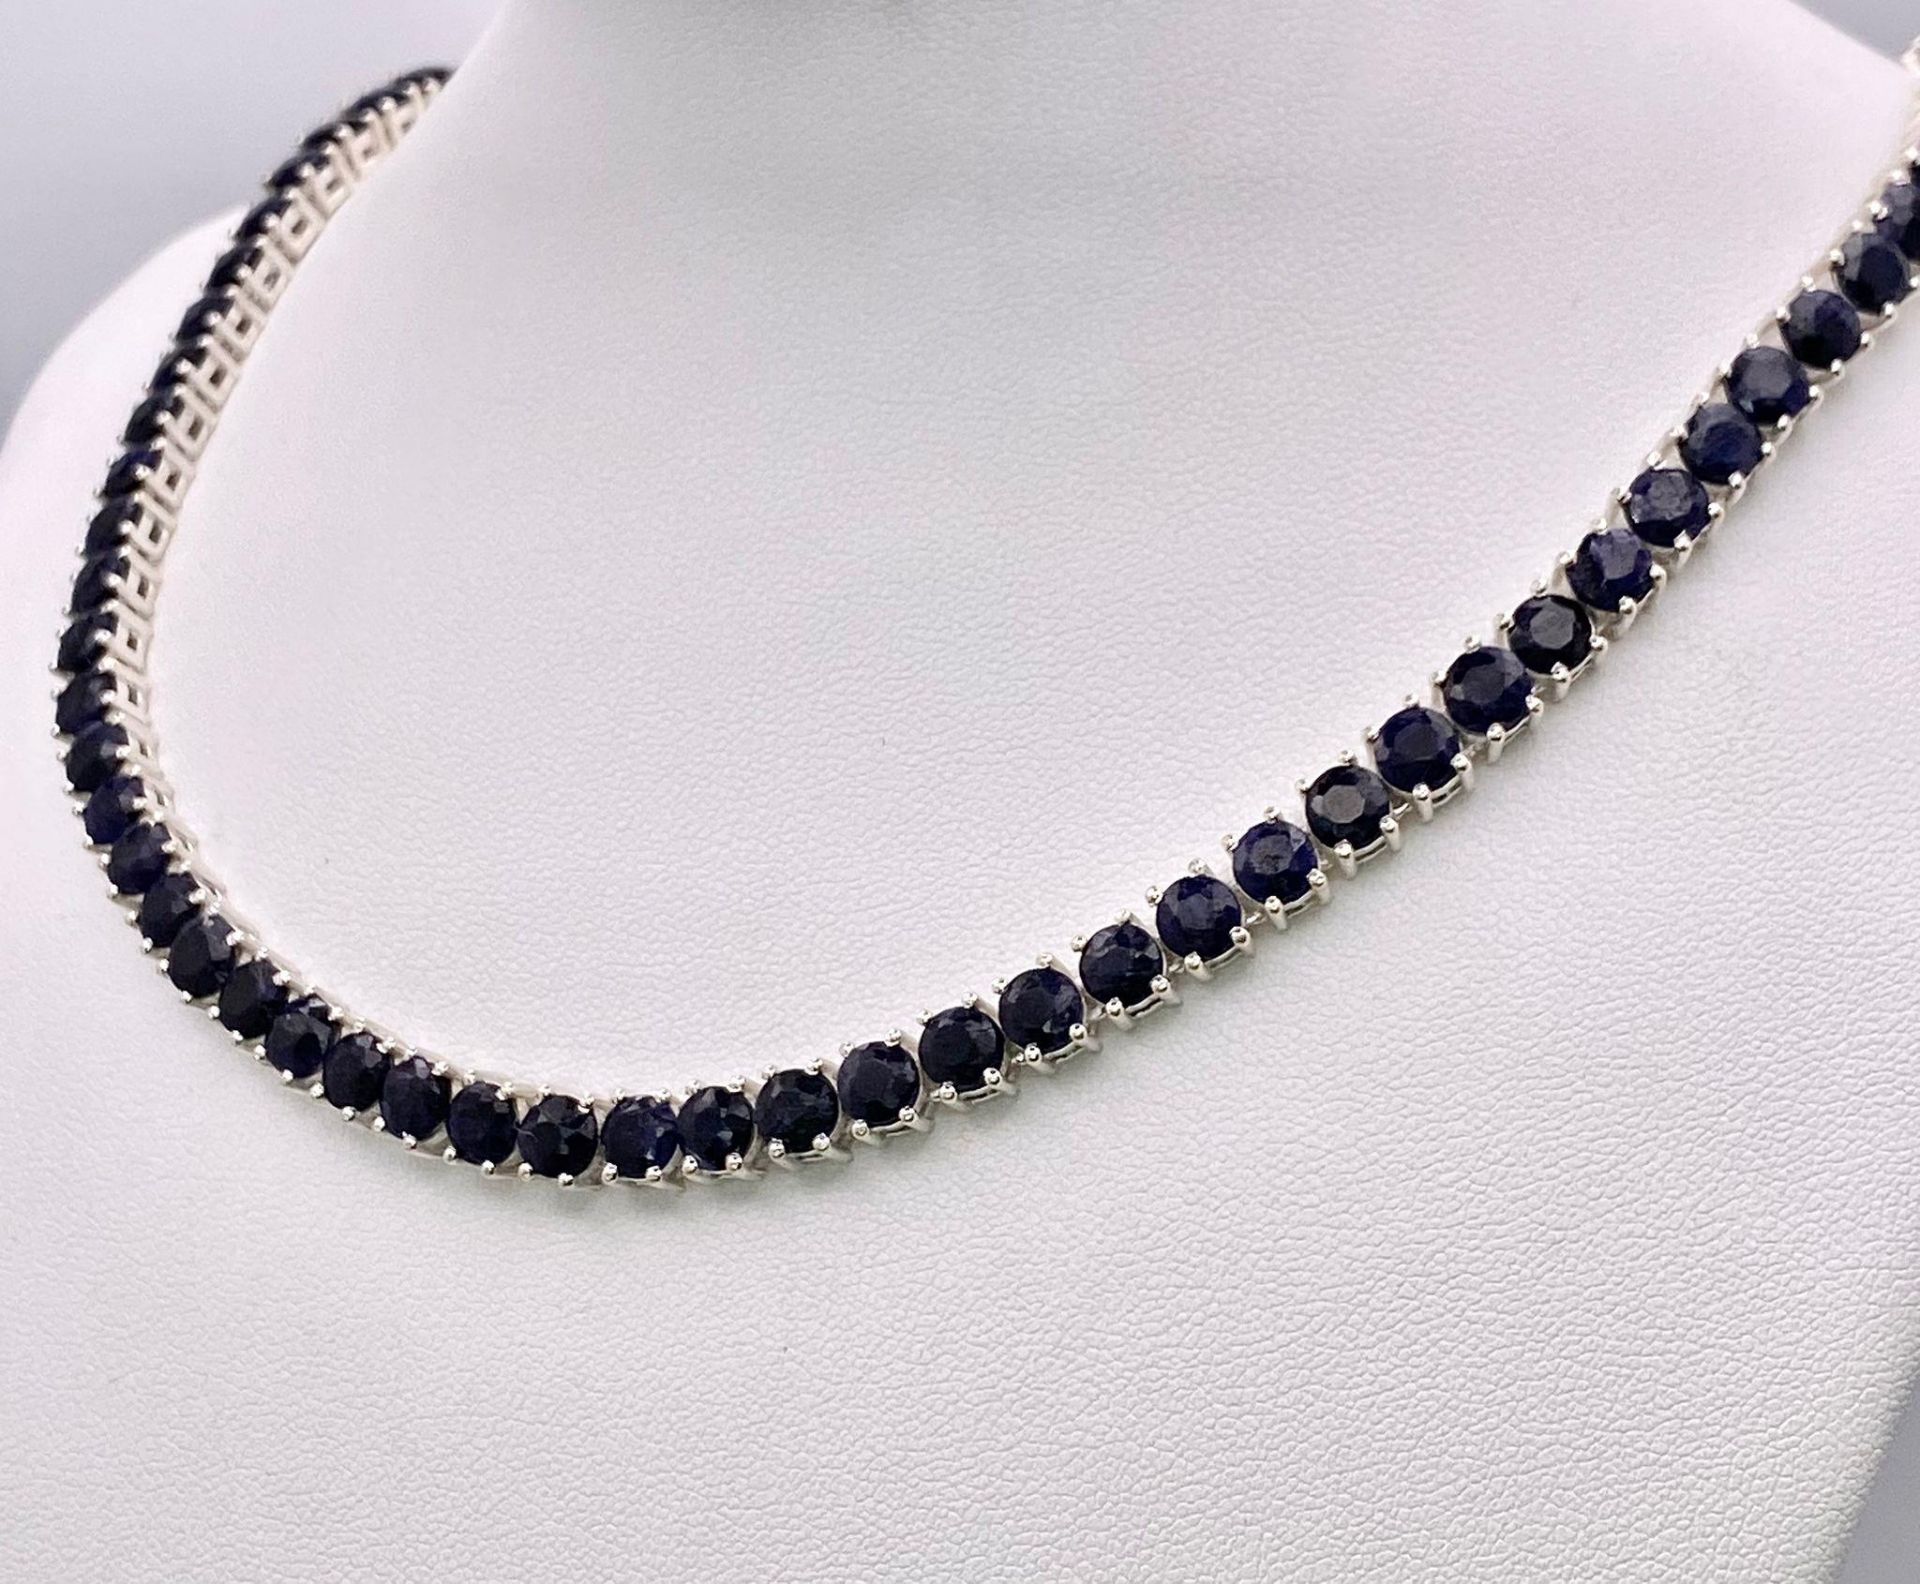 A Blue Sapphire Gemstone Tennis Necklace set in 925 Silver. 45cm length. 40.15g total weight. - Image 2 of 4